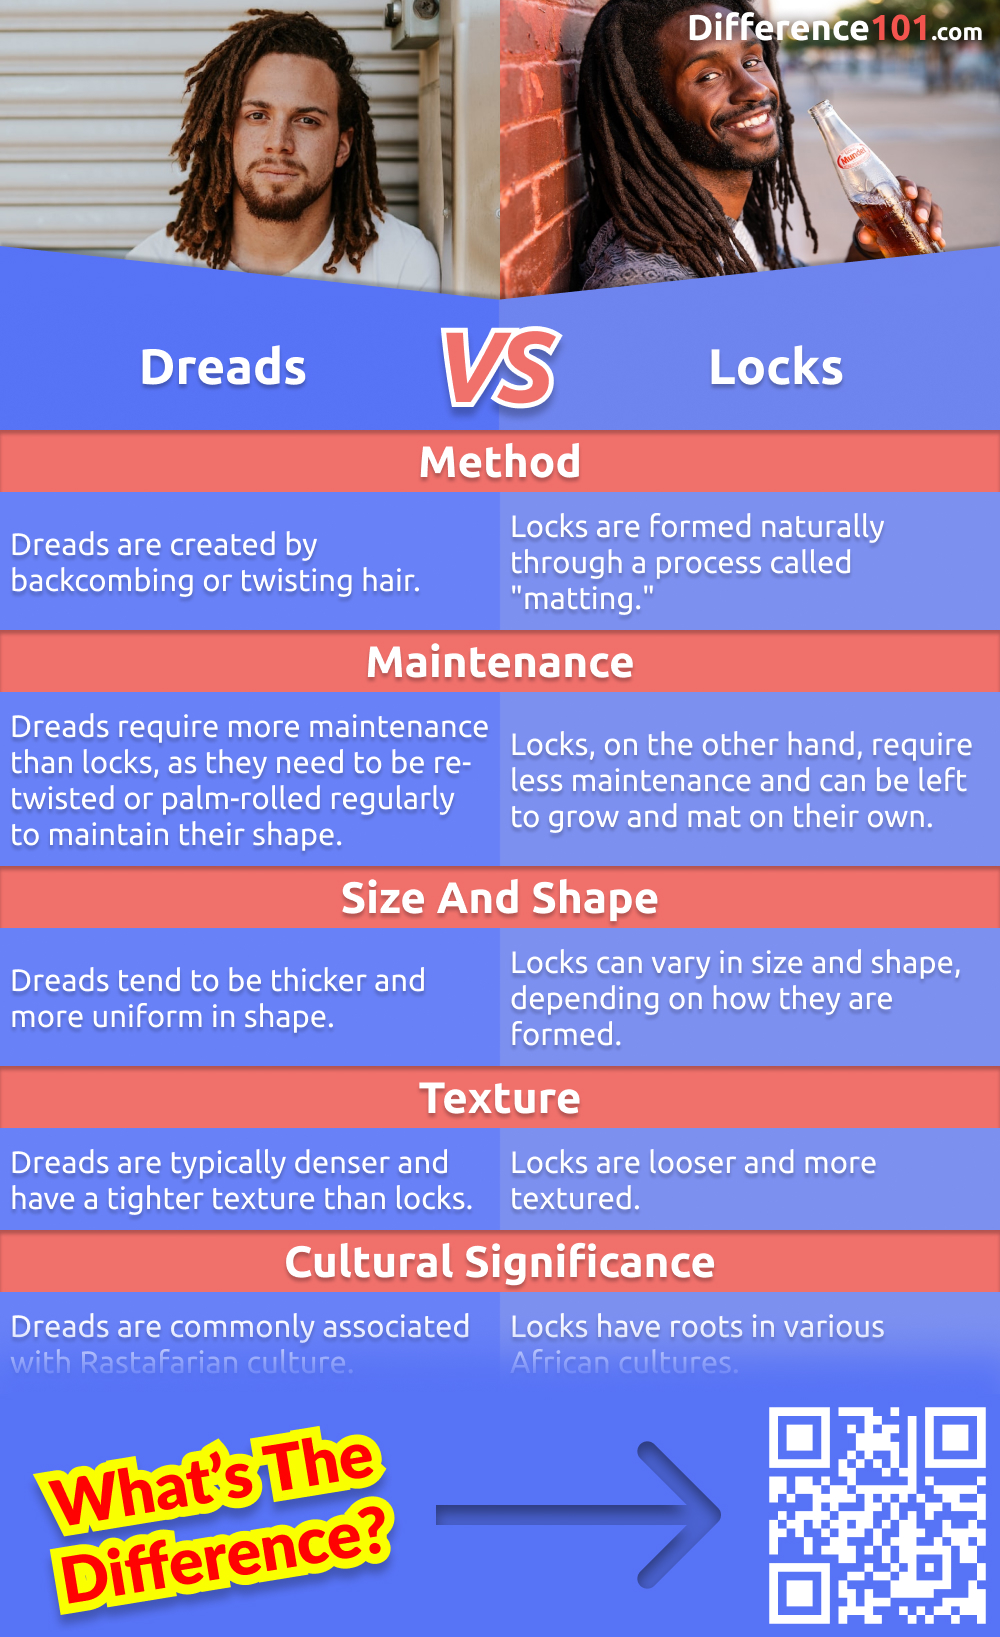 Are you trying to decide between dreads and locks? This article will help you understand the differences between the two hairstyles, and help you decide which one is right for you. 